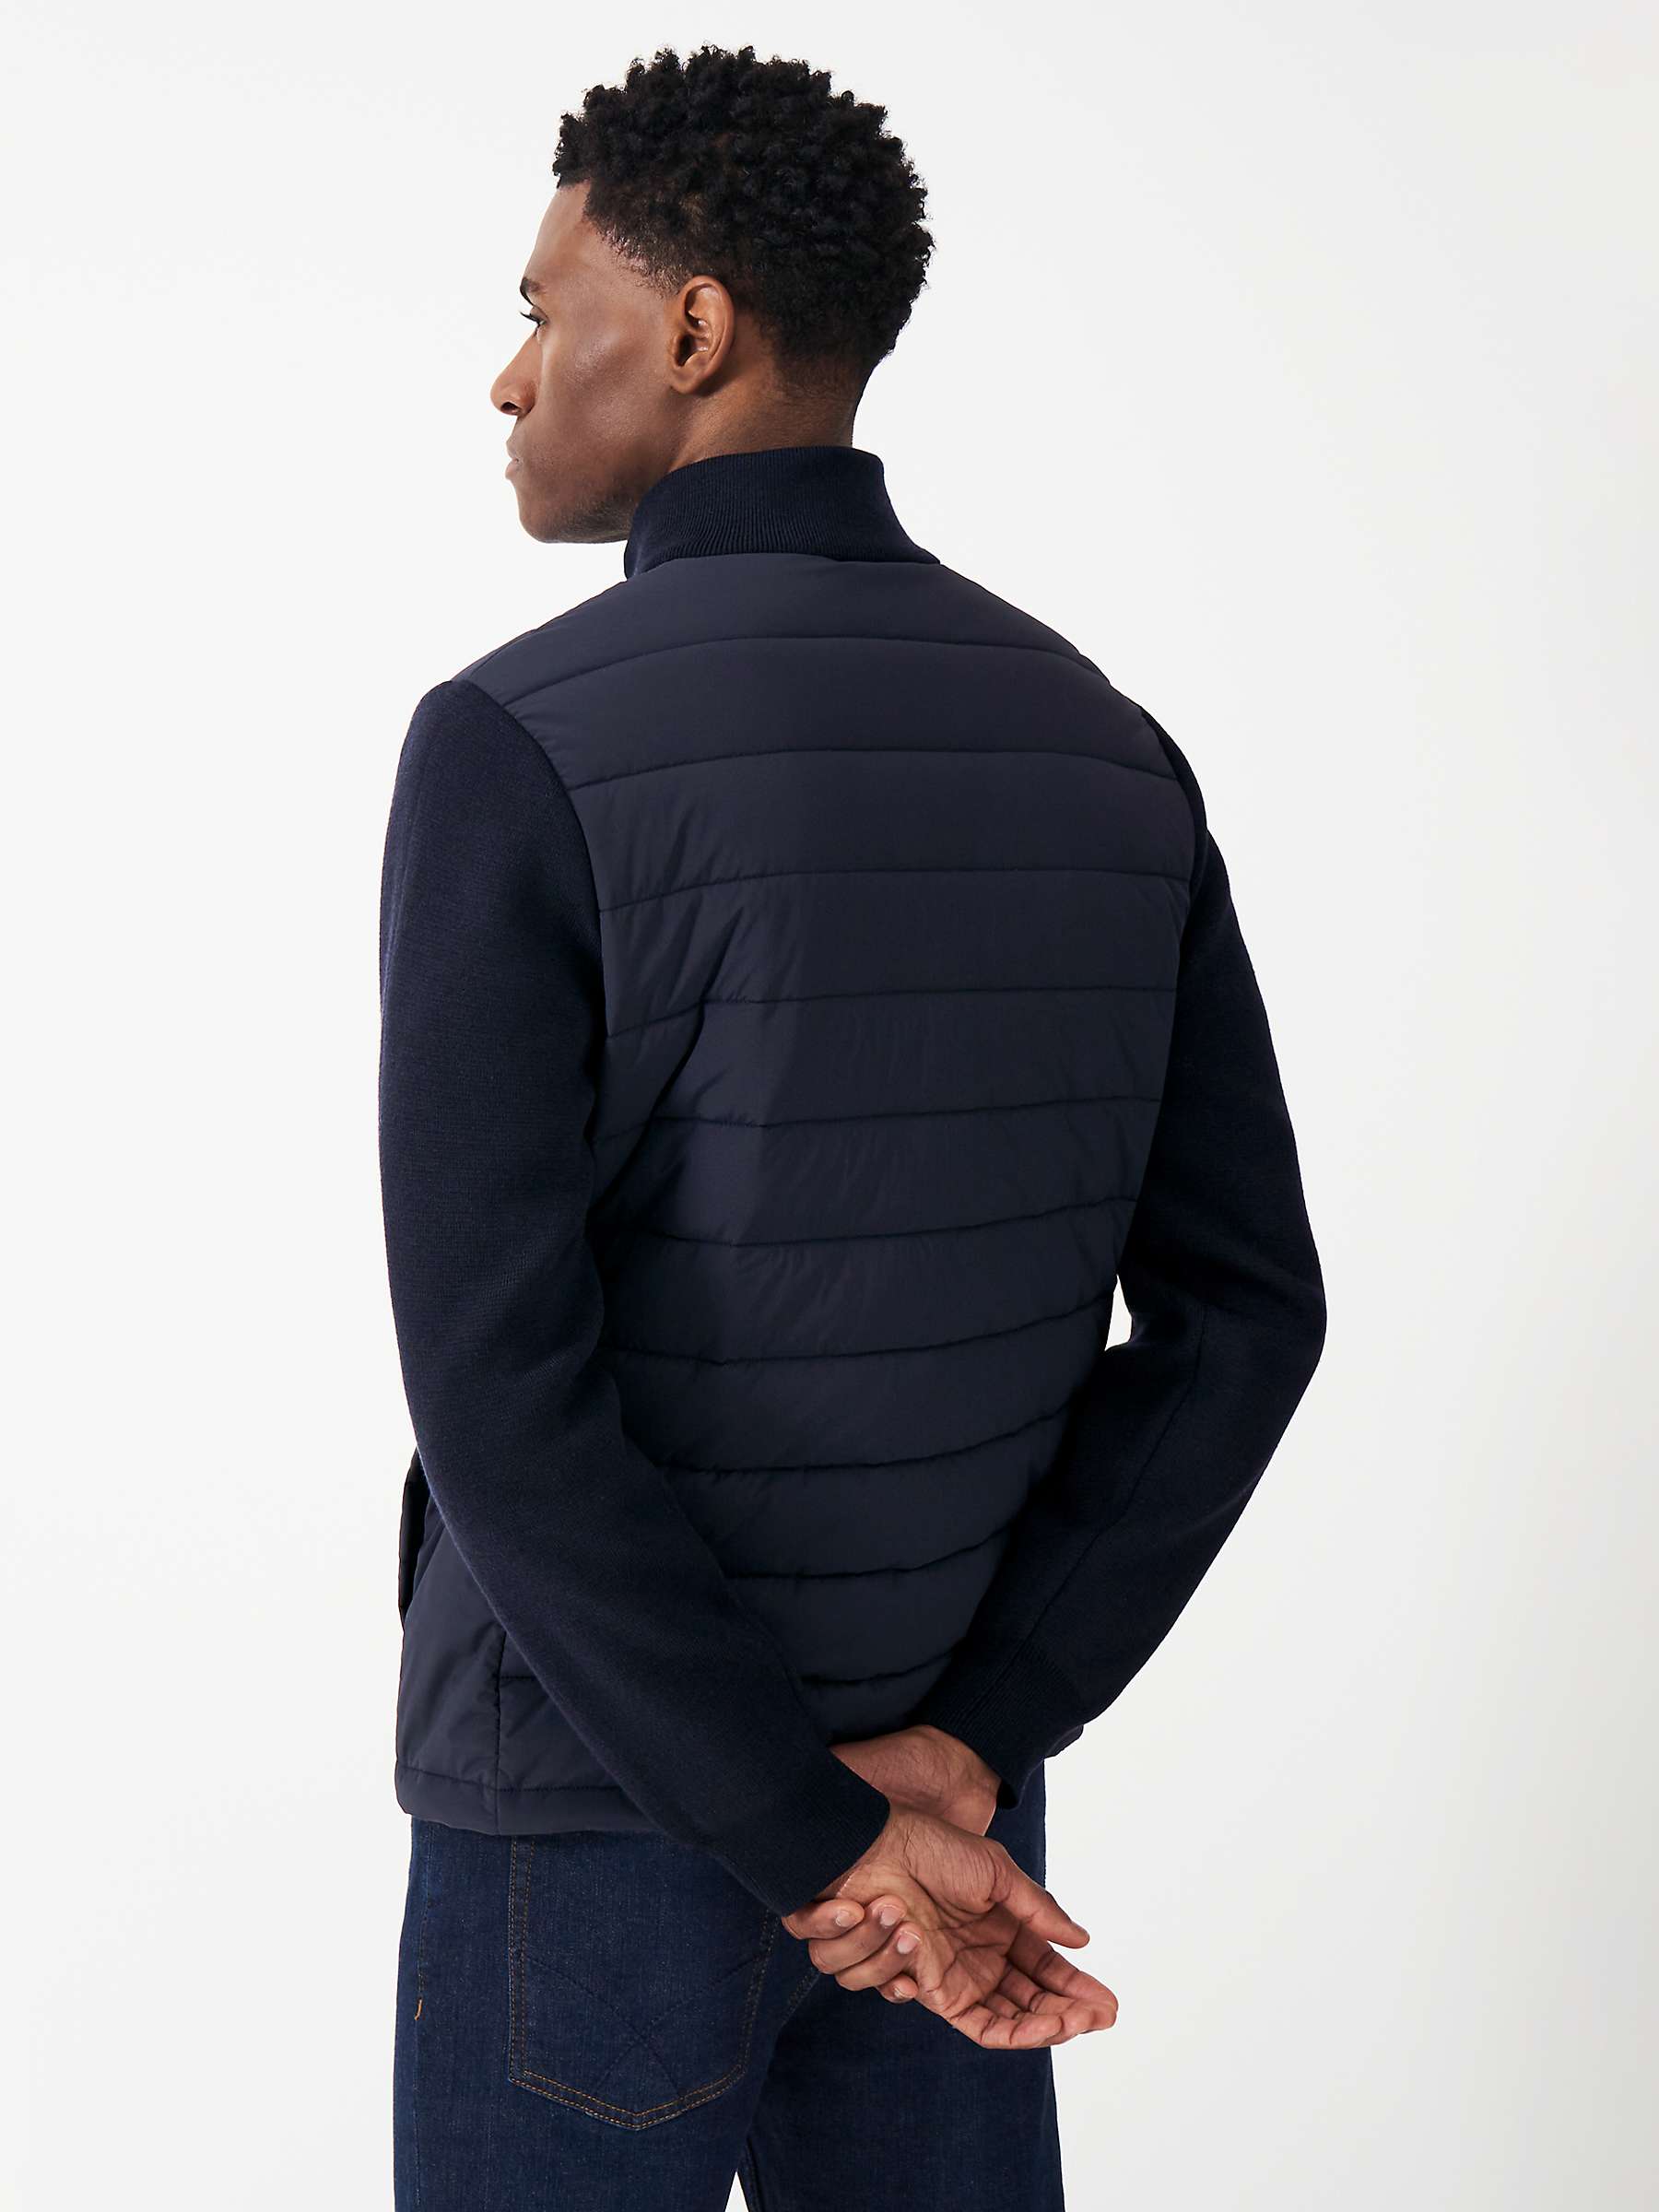 Buy Crew Clothing Dartmouth Wool Blend Hybrid Quilted Jacket Online at johnlewis.com